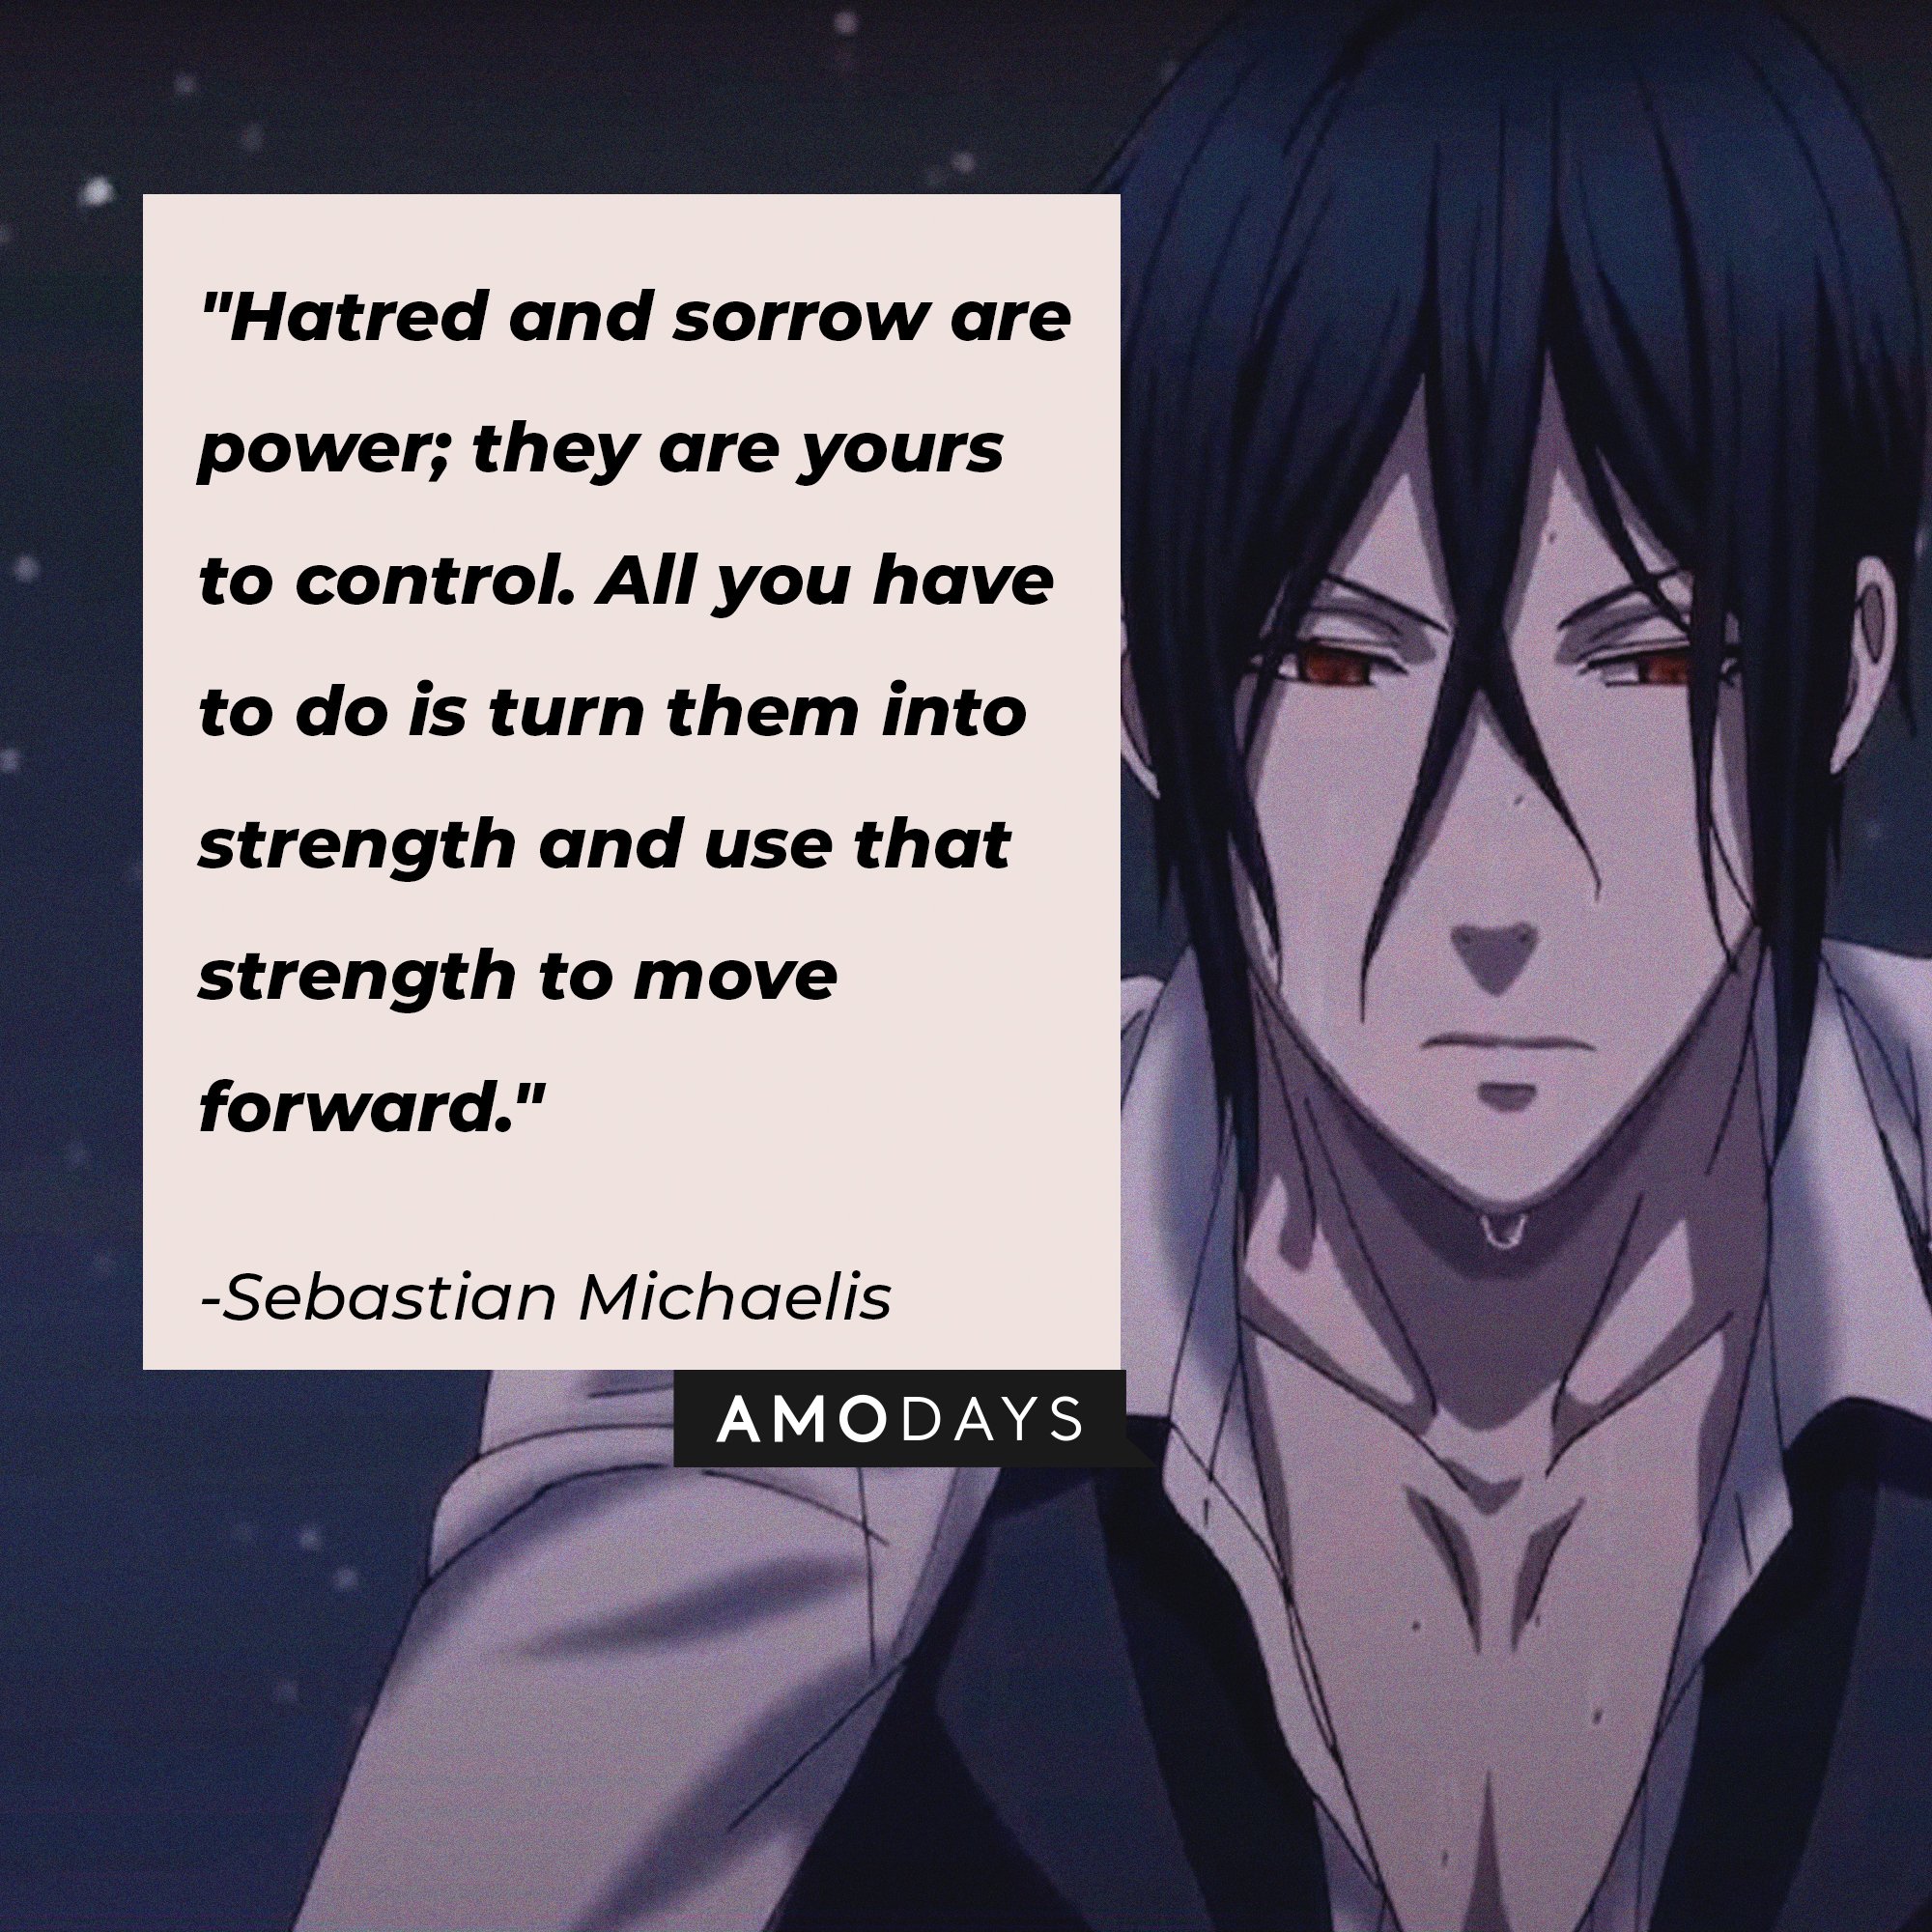 Sebastian Michaelis’ quote: "Hatred and sorrow are power; they are yours to control. All you have to do is turn them into strength and use that strength to move forward." | Image: AmoDays